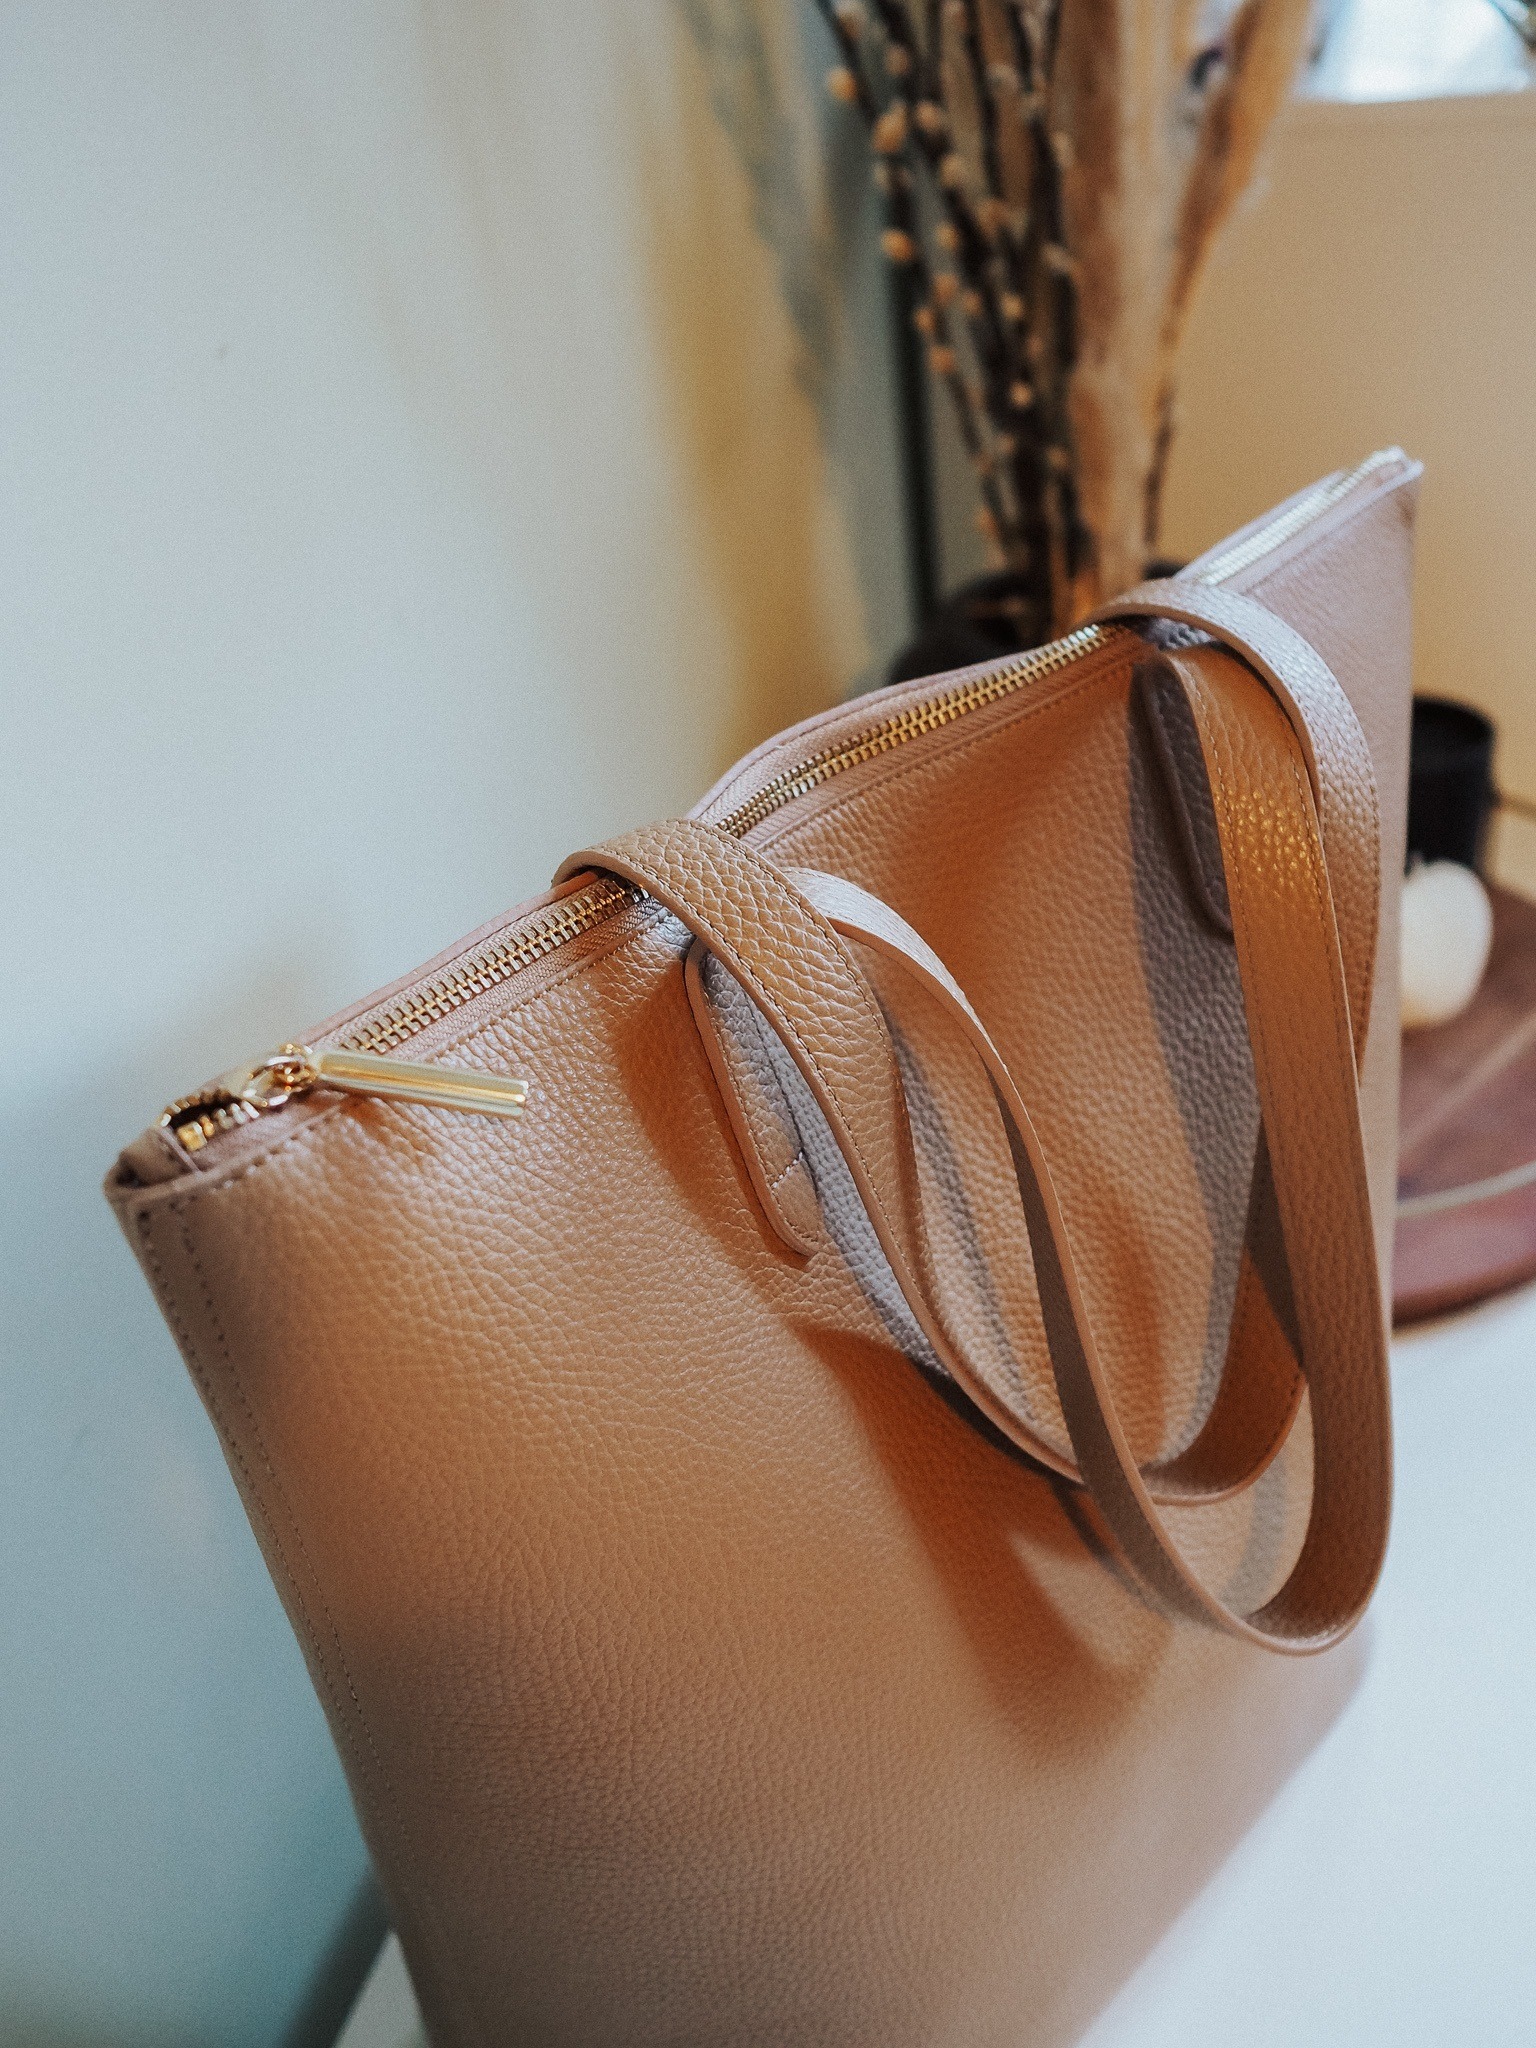 Trying to choose the best Cuyana leather tote? Look no further than the Tall Structured Zipper Tote in this blog post review.